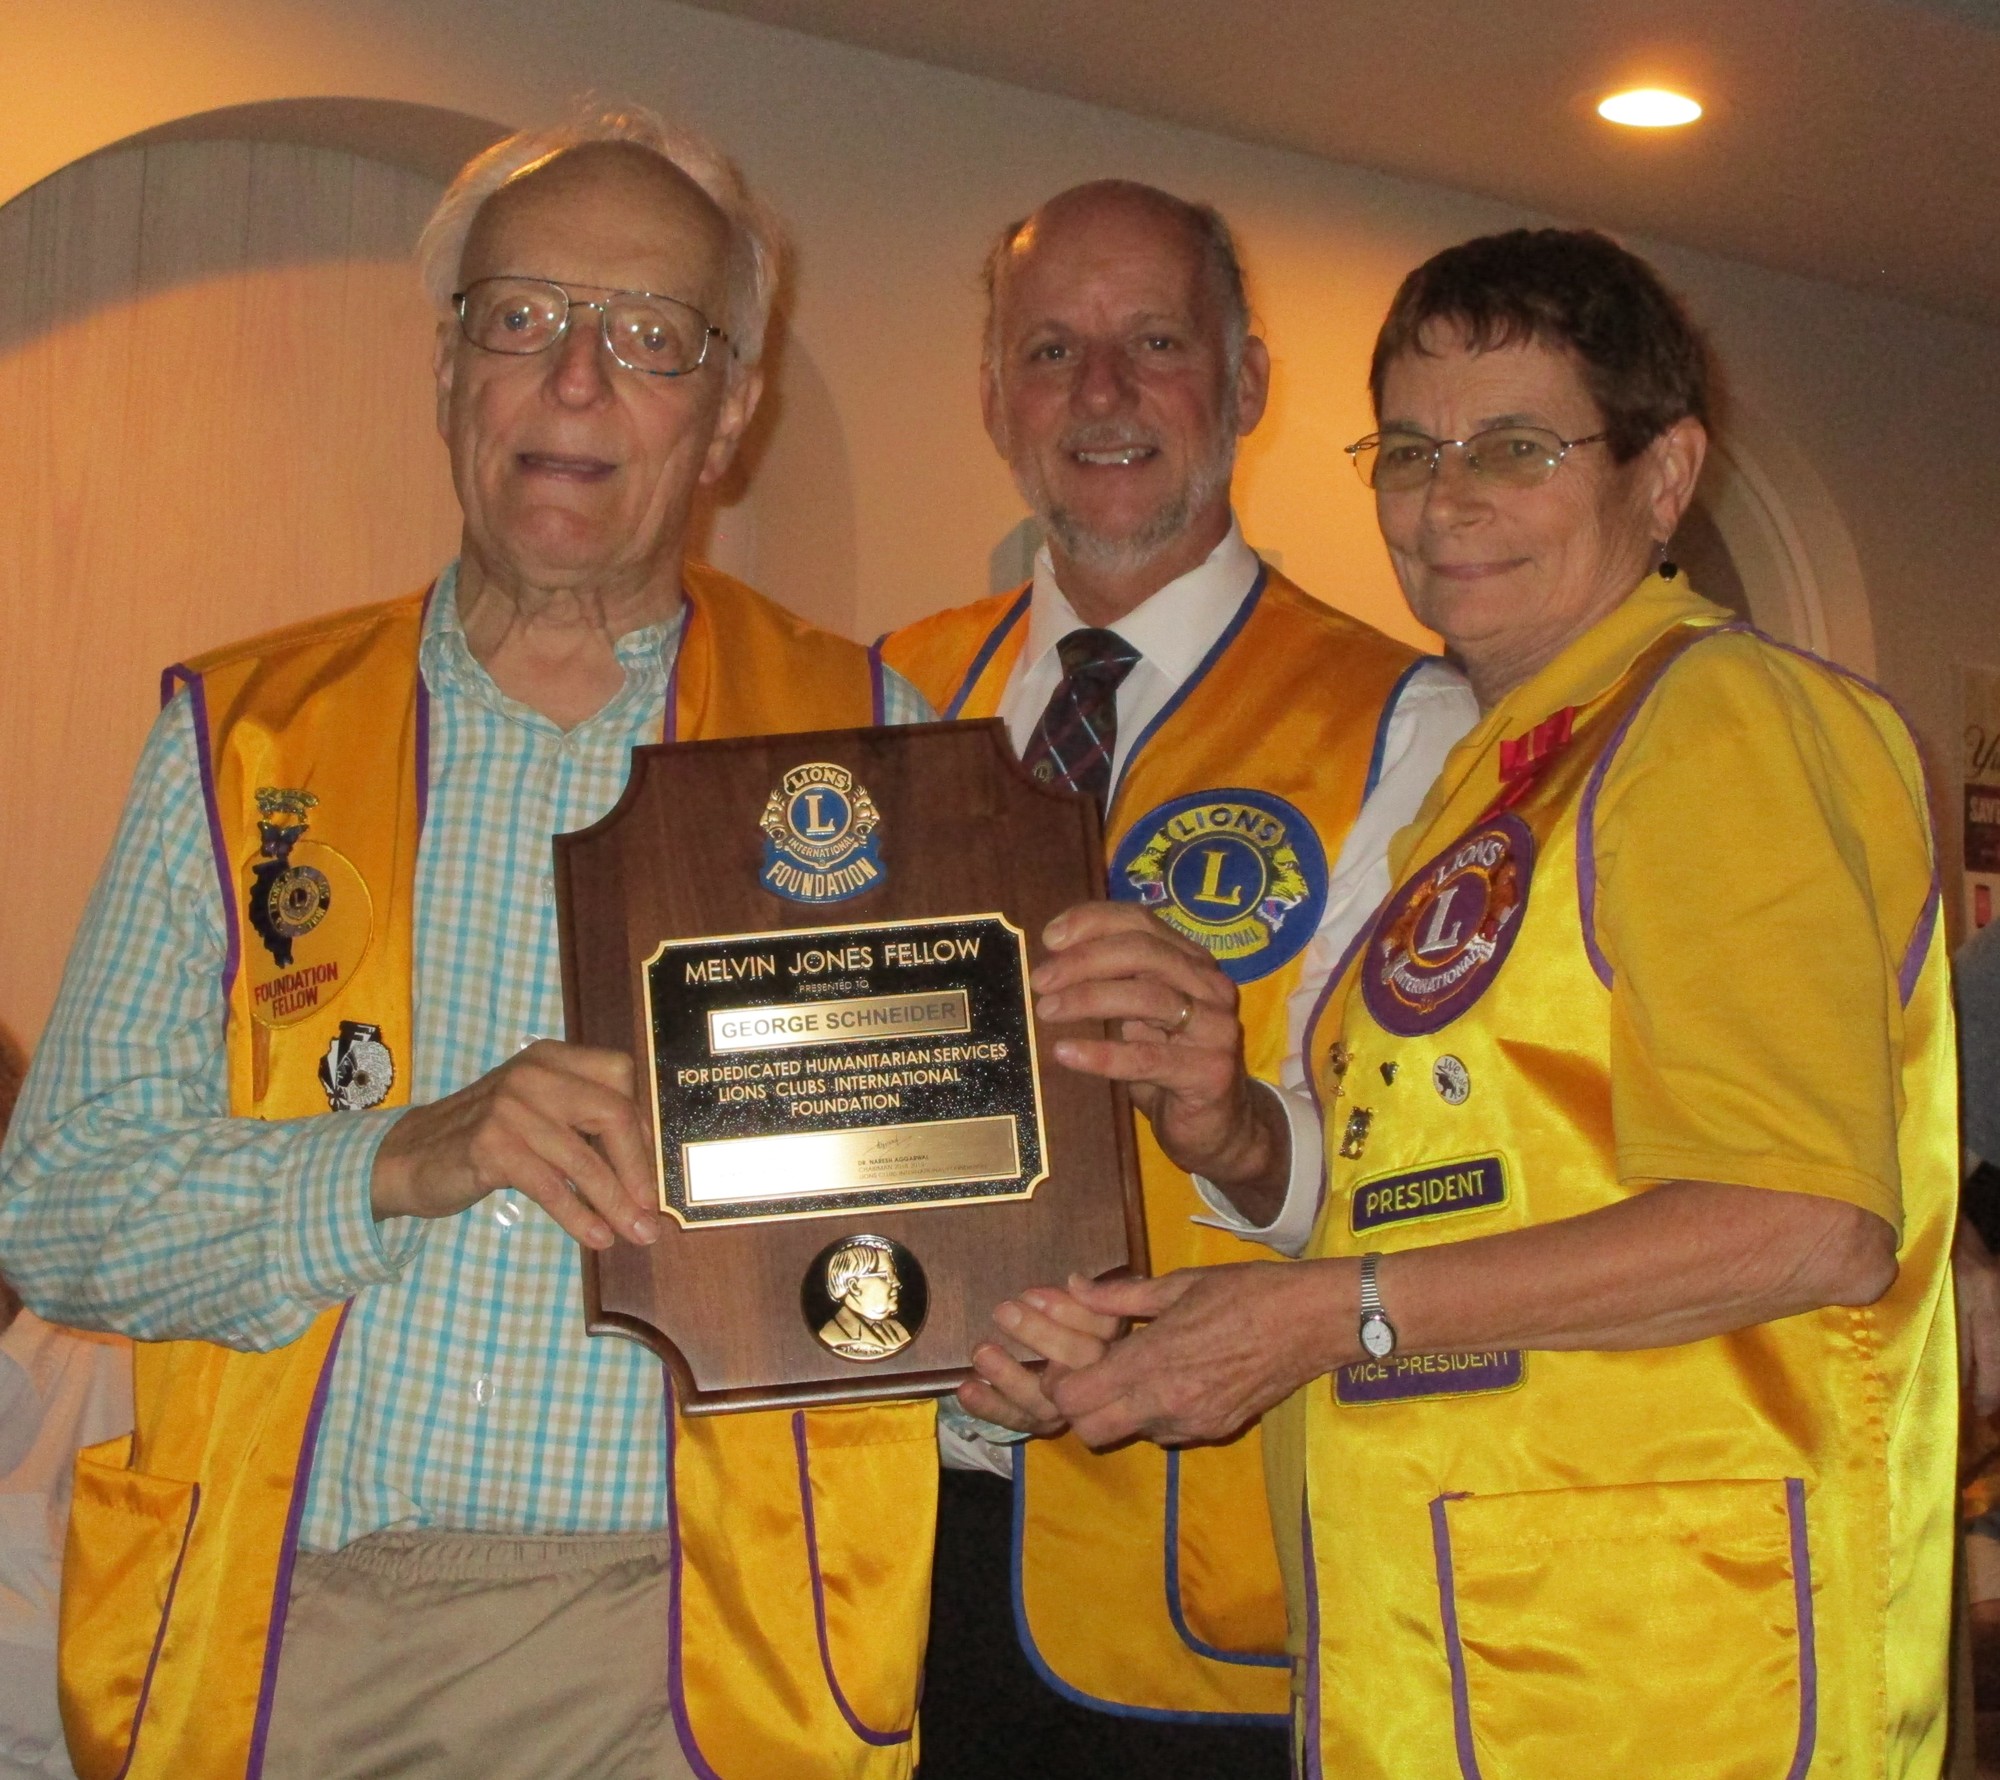 Lion George Schneider is presented his Melvin Jones Fellow by District Governor-Elect Greg Evans and Club President Mary Yochum. Courtesy photo